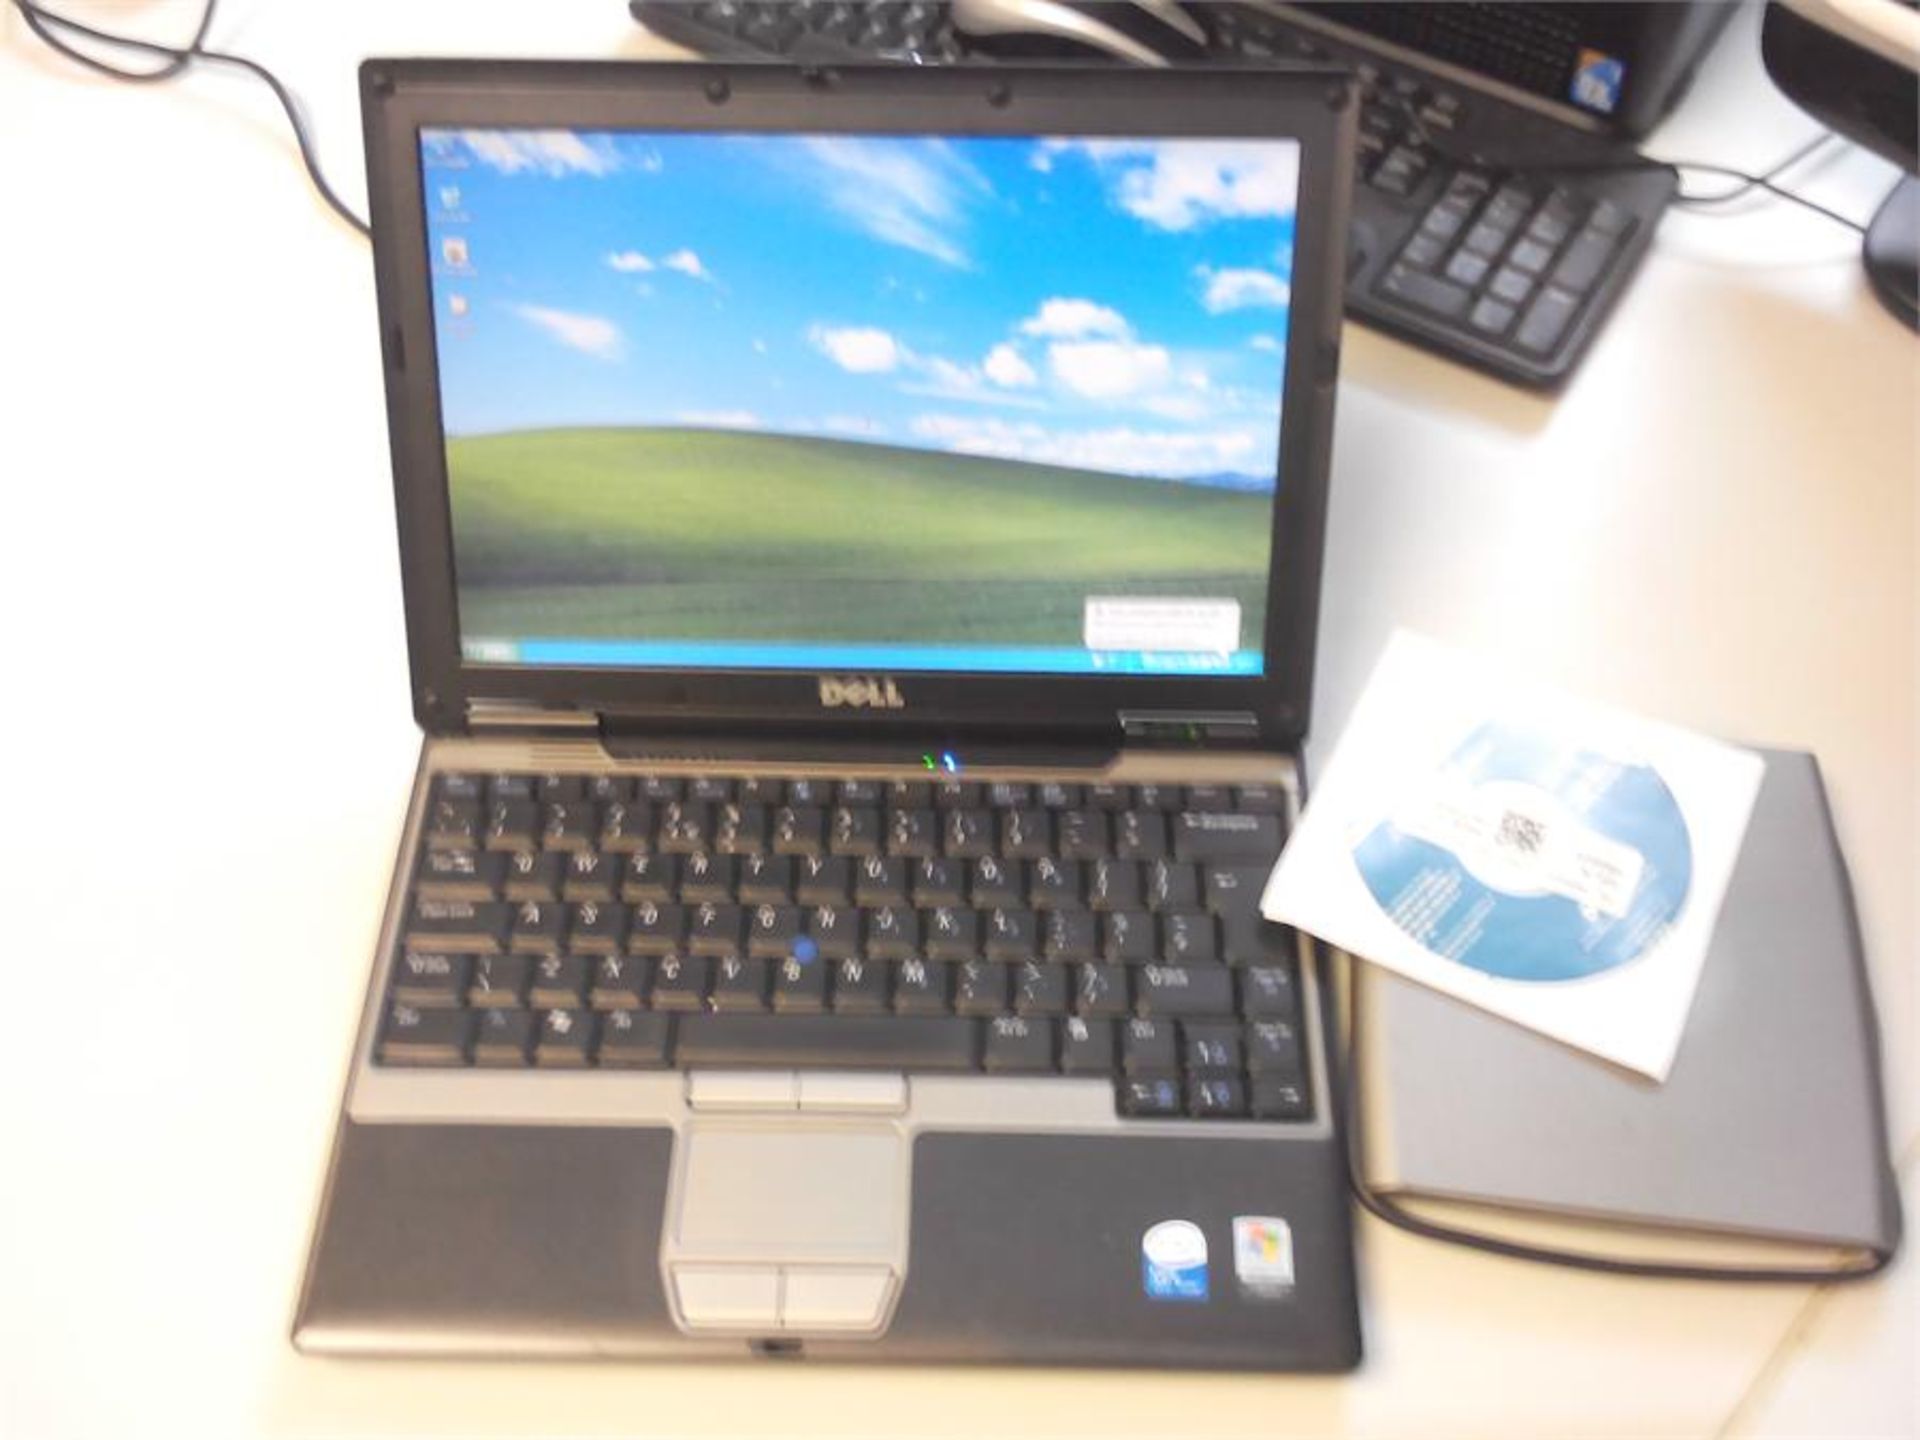 Dell D420 Intel Core Duo 1.2Ghz 1.5Gb 80Gb EXT DVD Windows Xp Pro Installed - Image 3 of 3